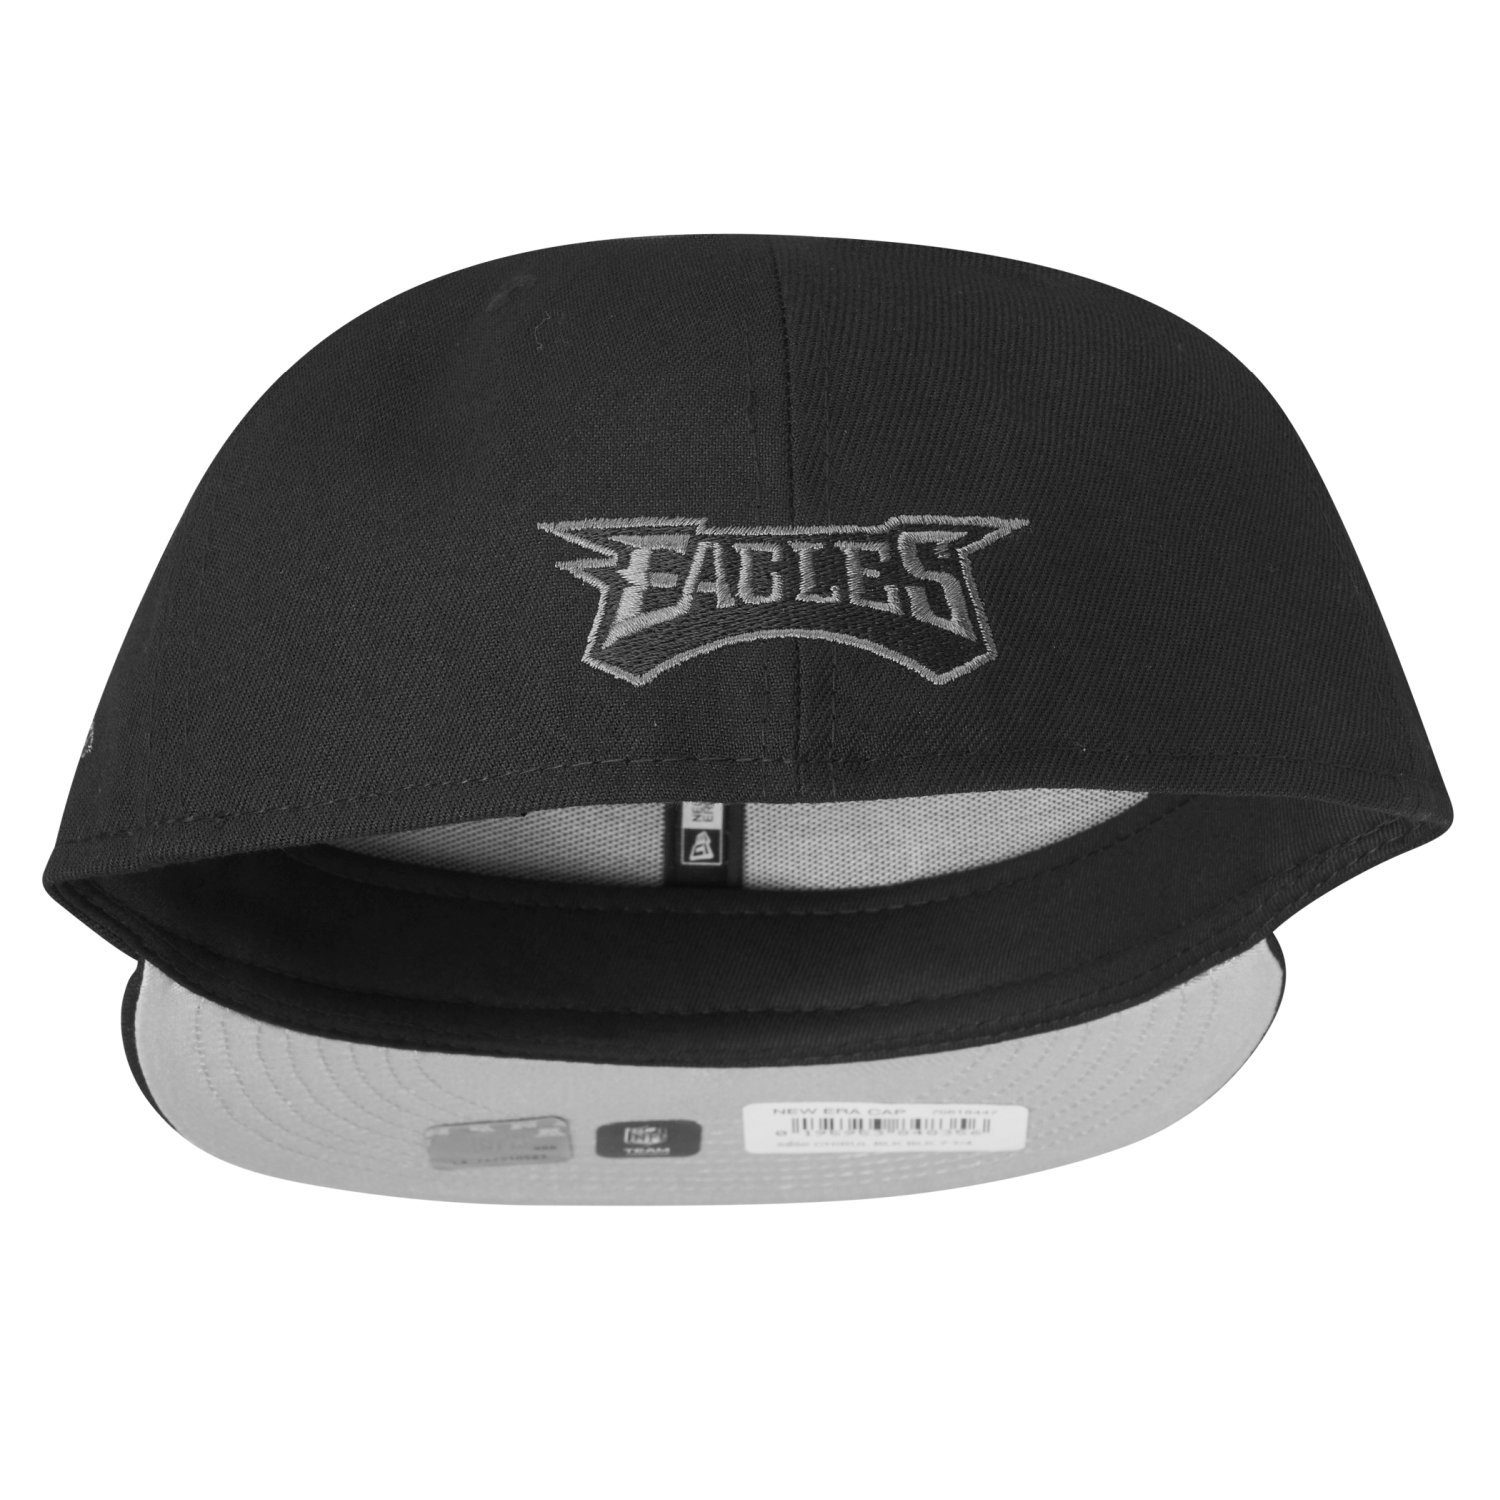 New Era Fitted Cap Philadelphia NFL 59Fifty TEAMS Eagles